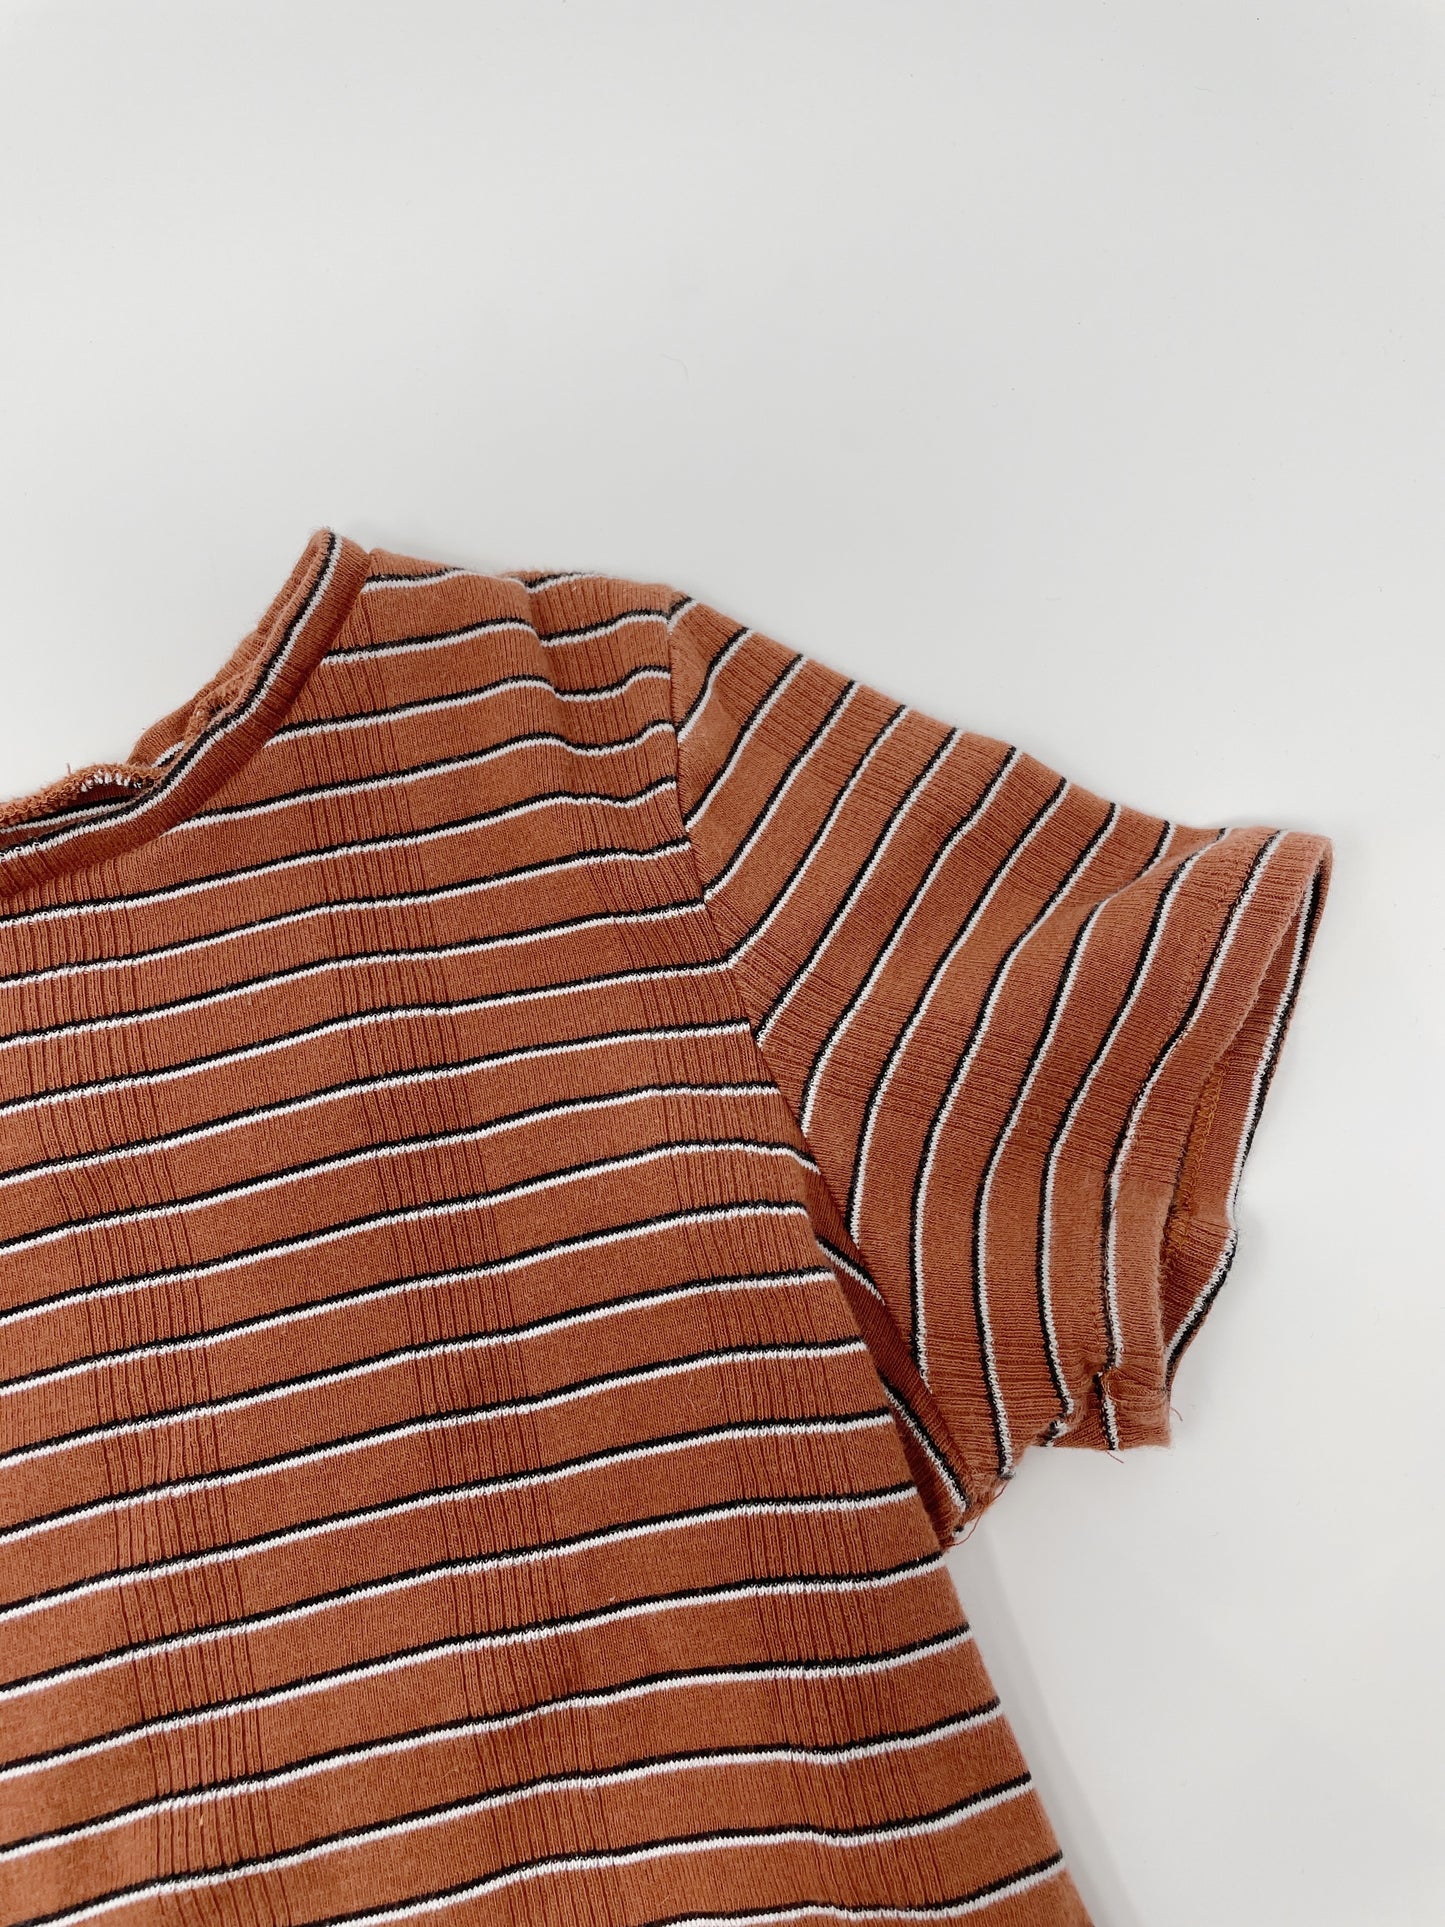 The Striped Spring Tee